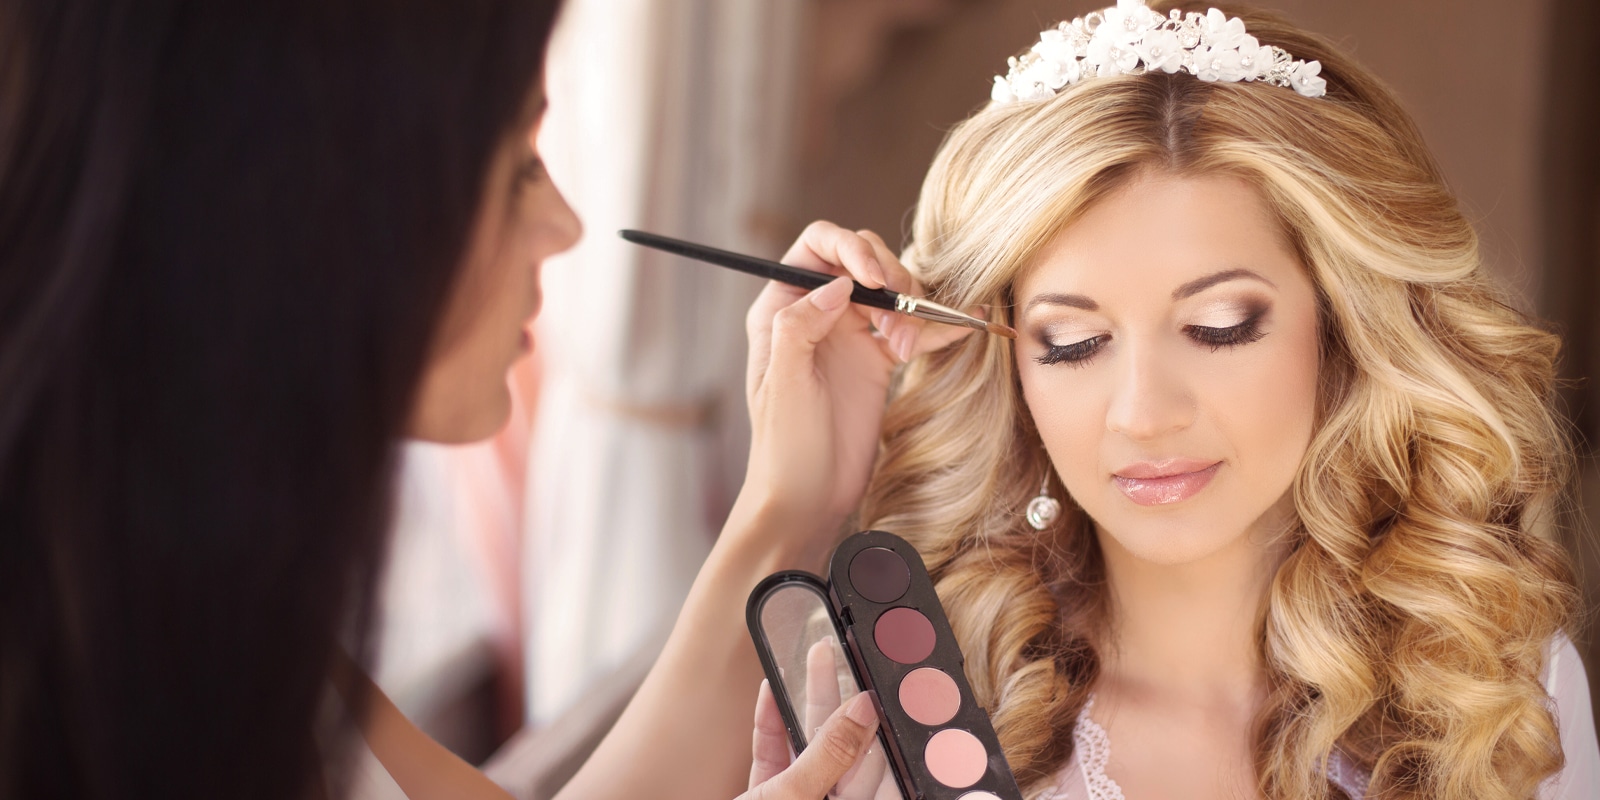 An image of a bride getting her make up done